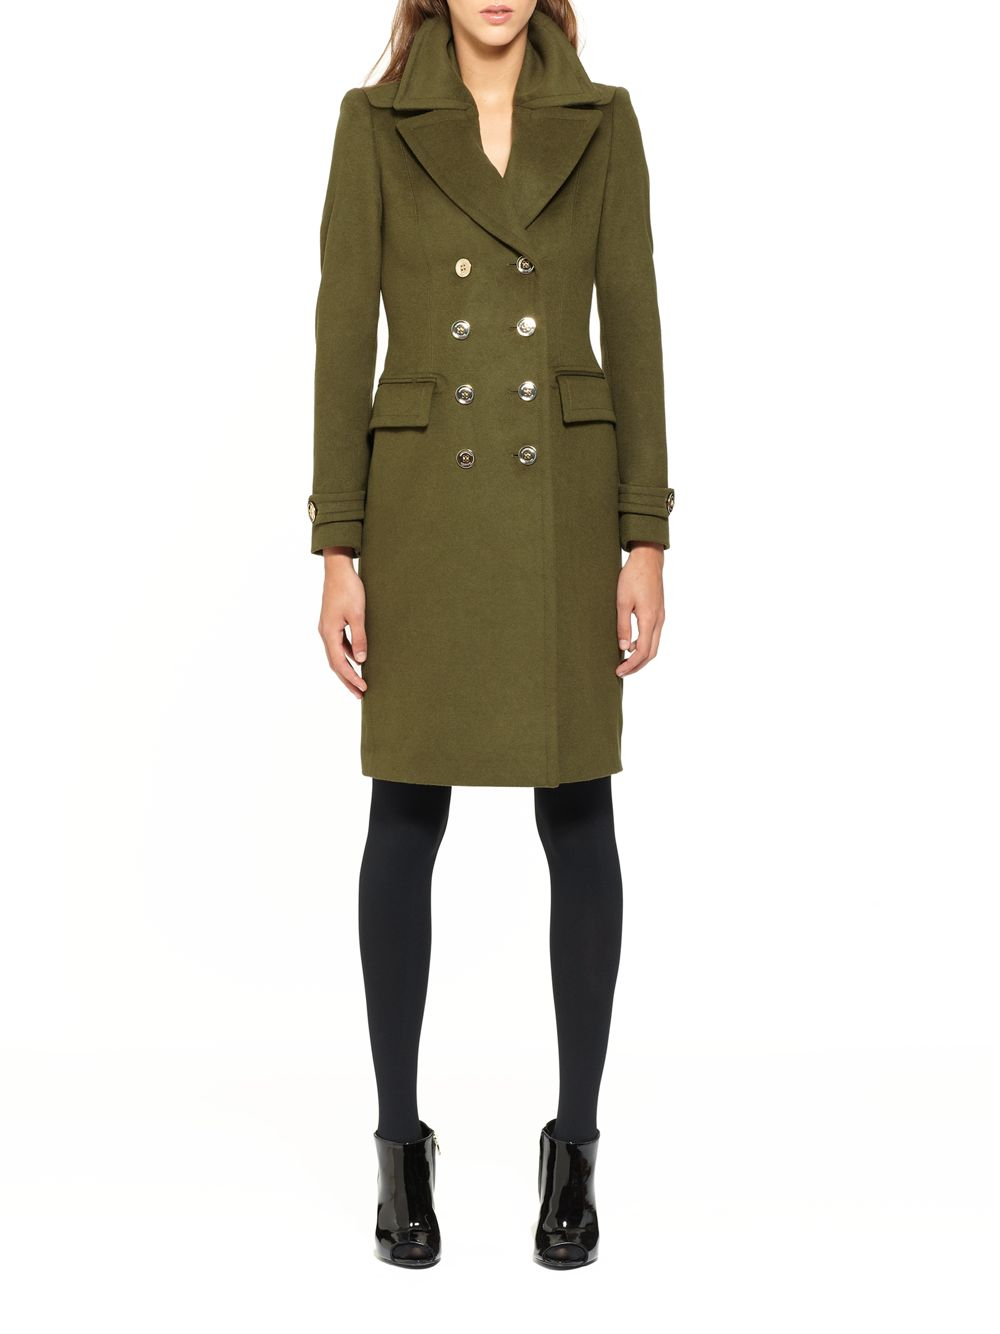 Burberry Doublebreasted Wool Cashmere Military Coat in Olive (Green) - Lyst